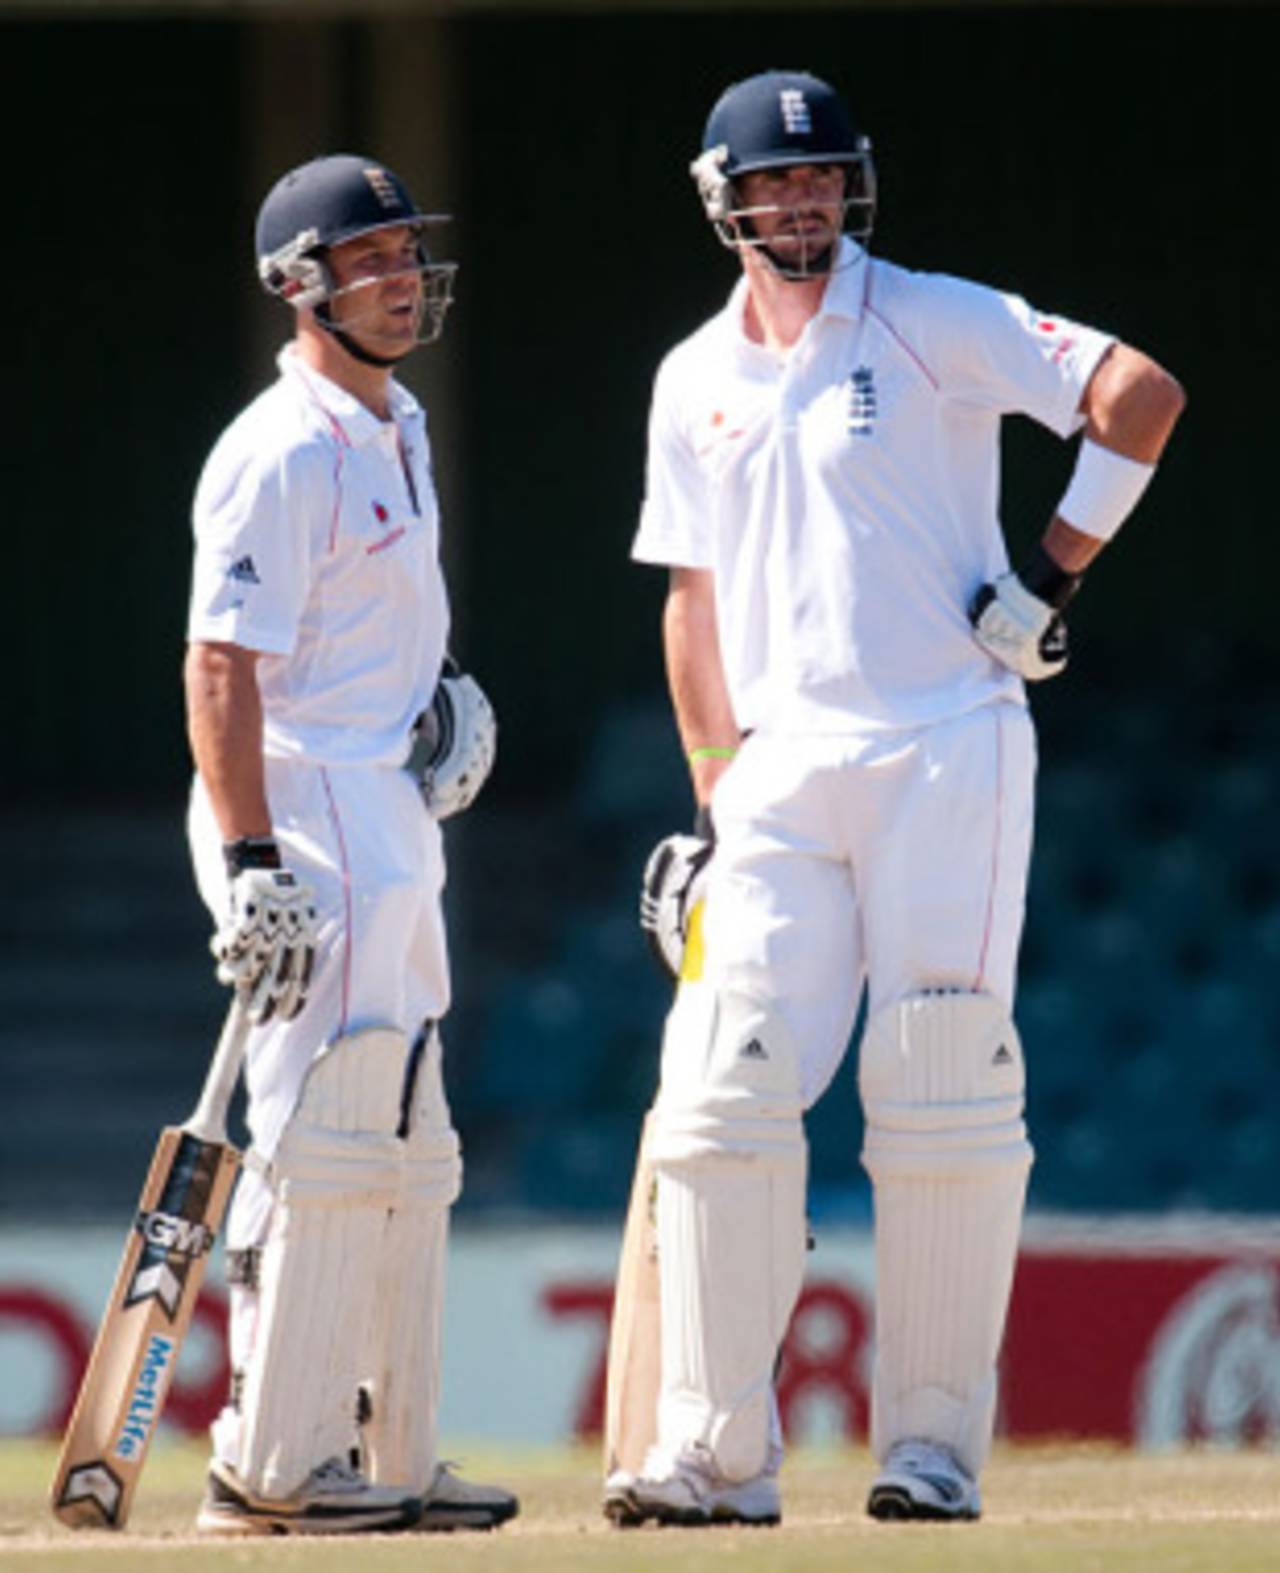 England's Jonathan Trott and Kevin Pietersen, South African Invitational XI v England XI at East London, December 11, 2009 